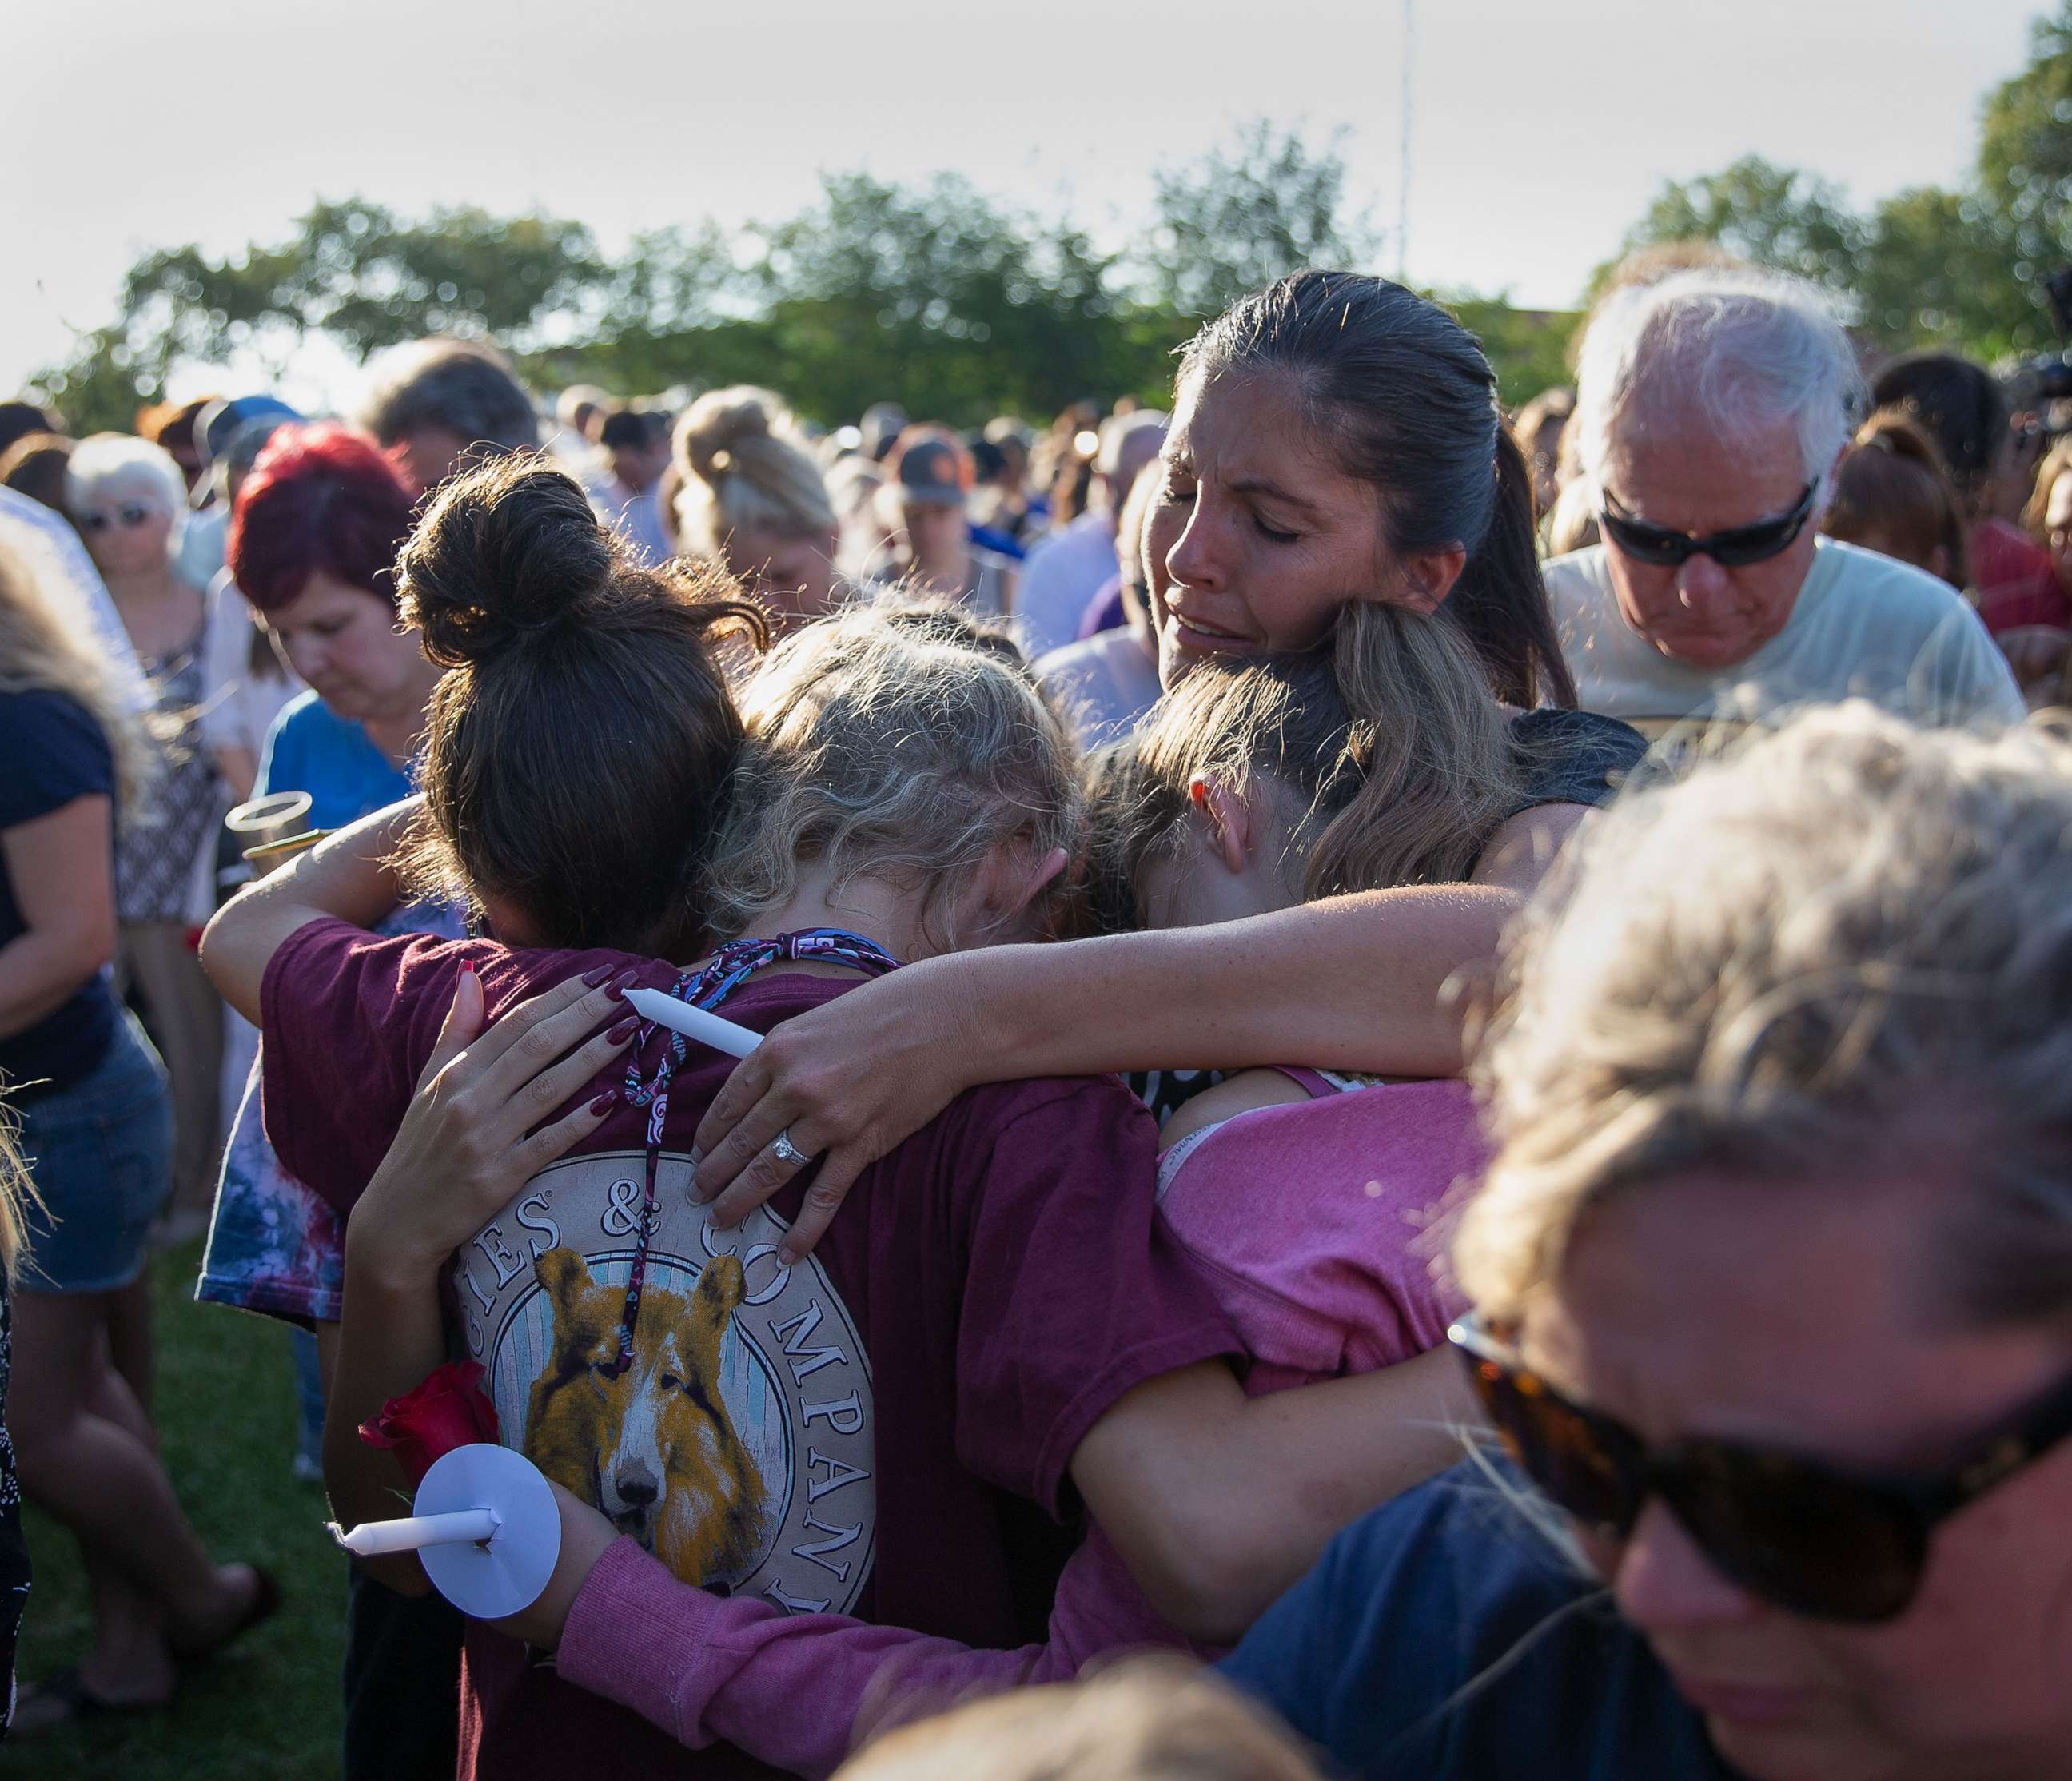 PHOTO: Friends and family attend a vigil held at the First Bank in Santa Fe for the victims of a shooting incident at Santa Fe High School, May 18, 2018 in Santa Fe, Texas.